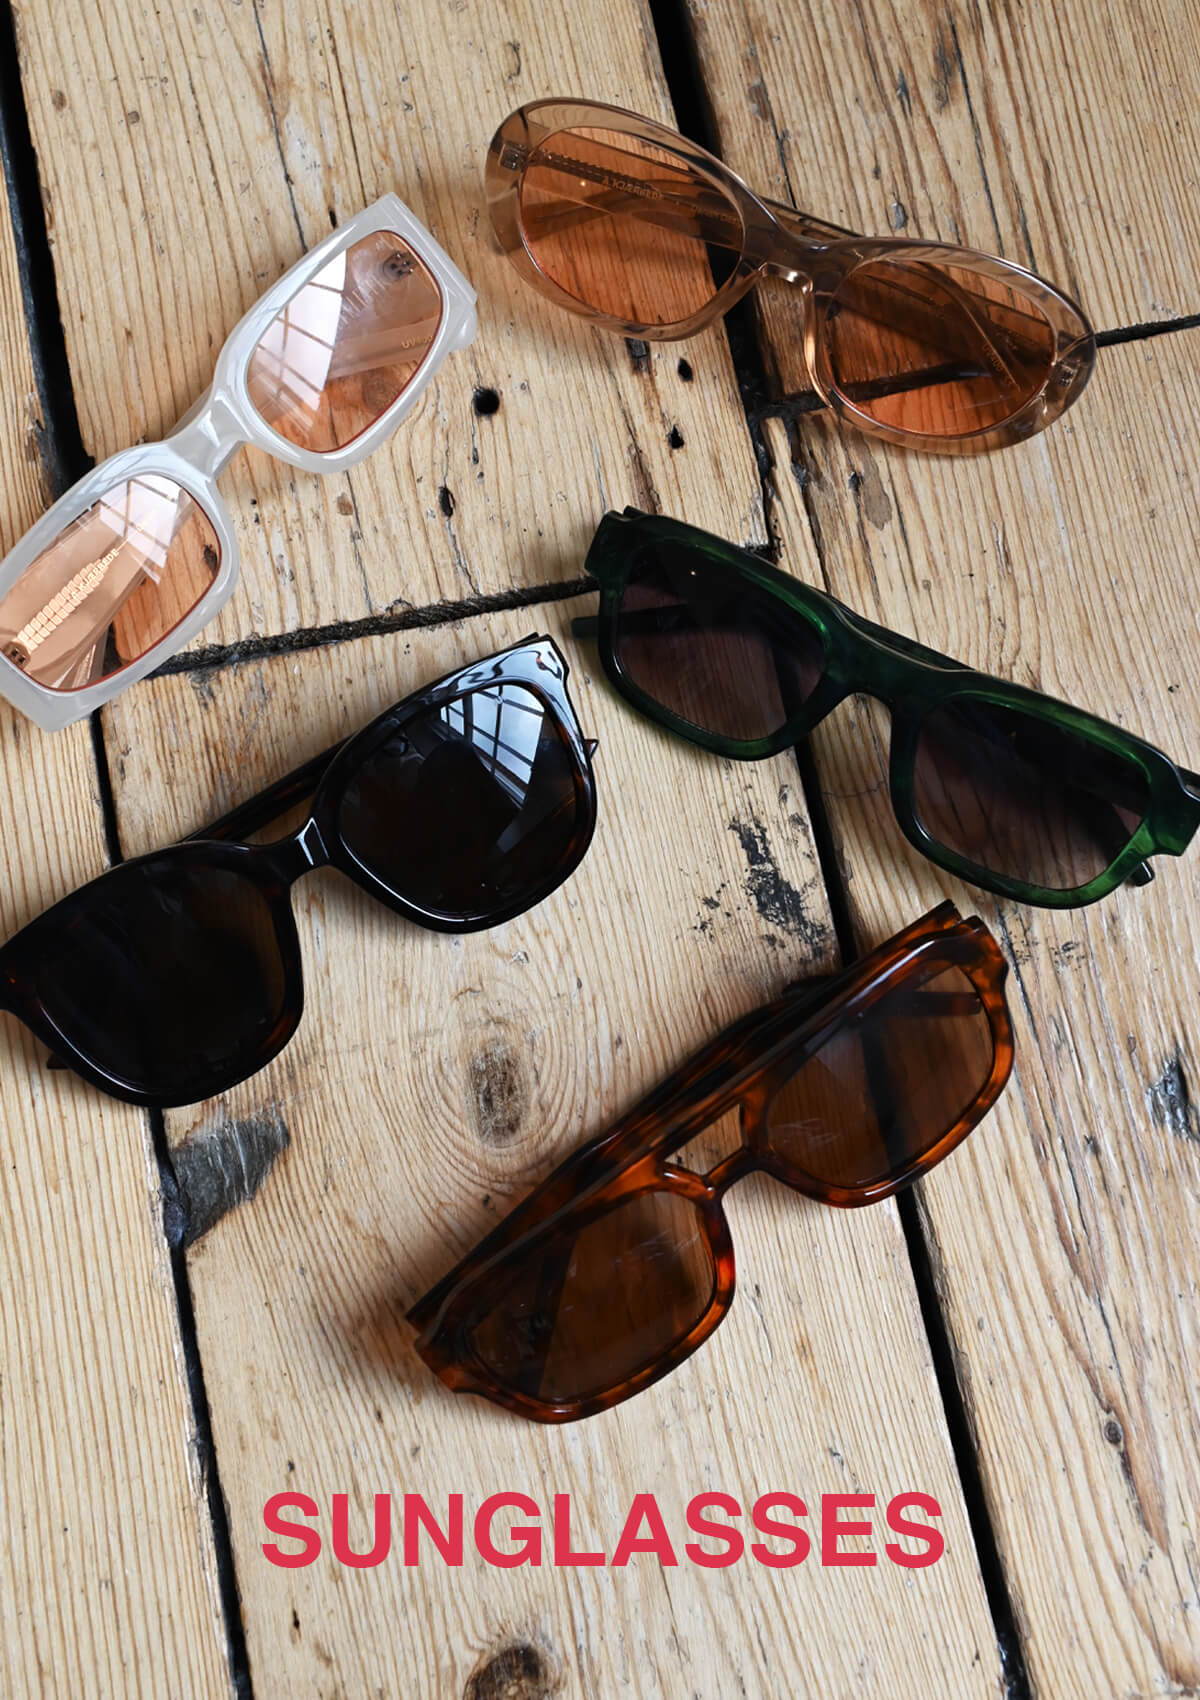 A styled image of A.Kjaerbede sunglasses.